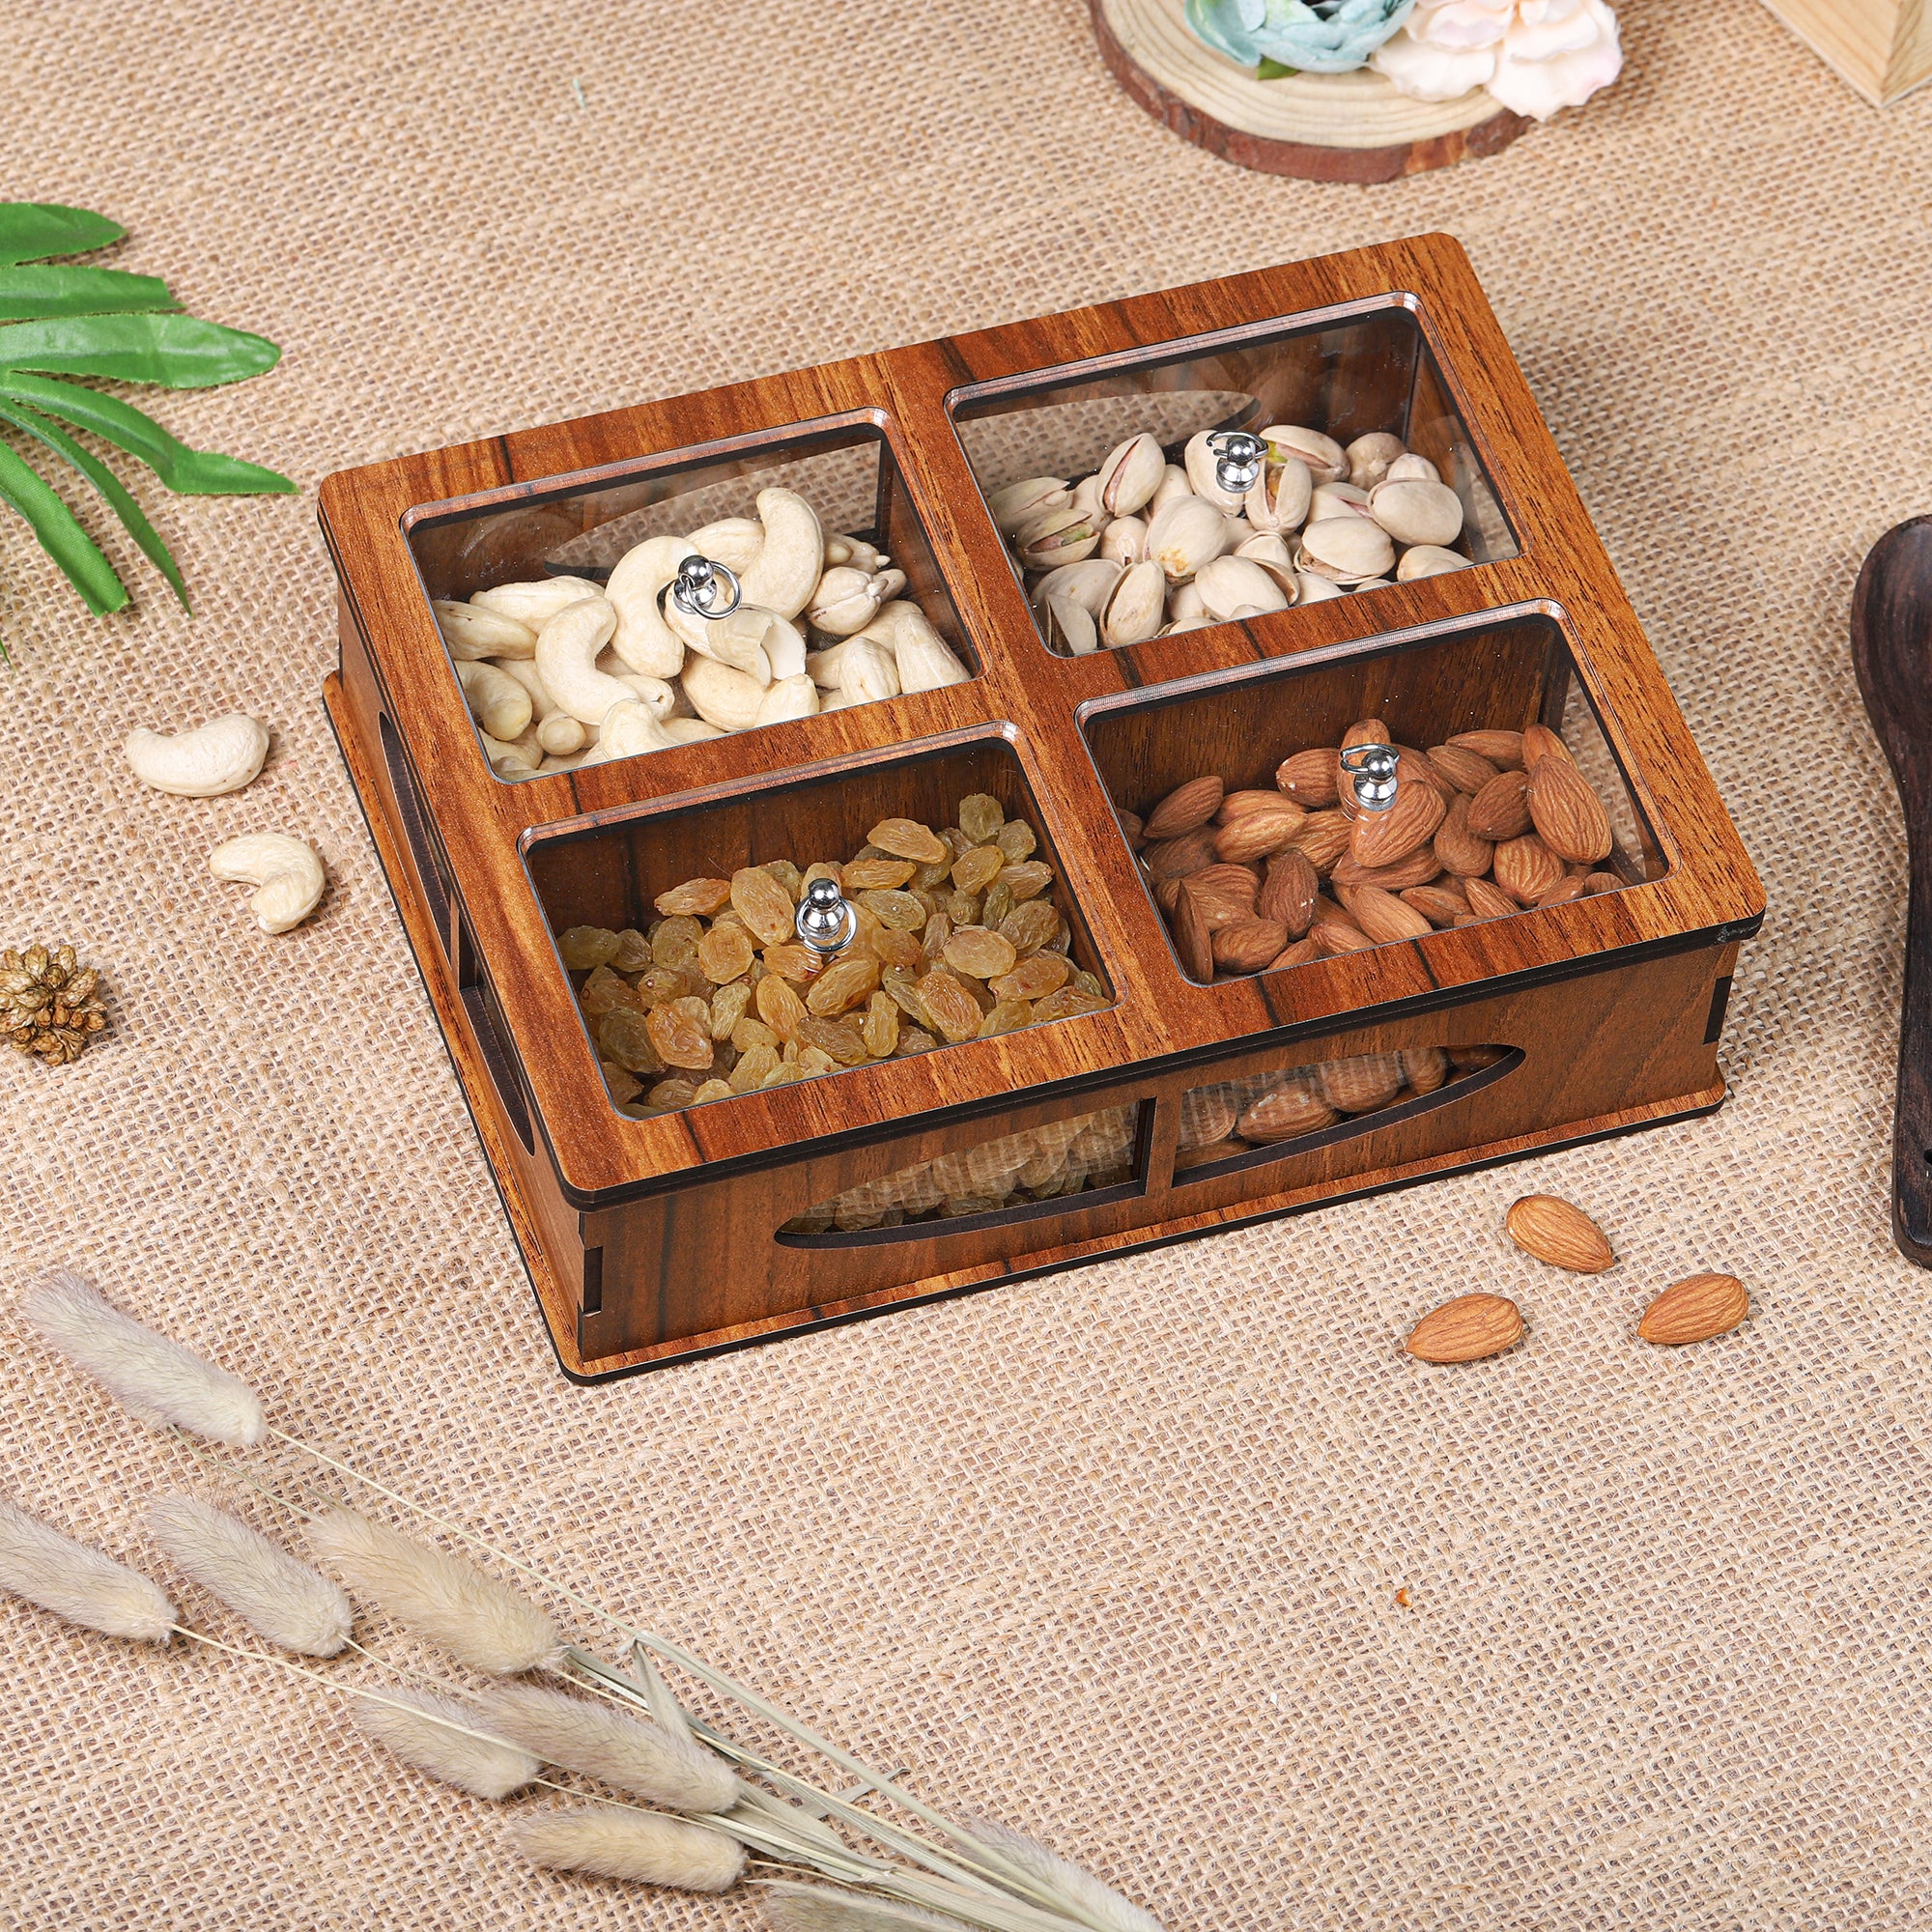 Dryfruit and Mukhwas Box Container for Festival Gifting, Home & Kitchen Gifting (4 Compartment)